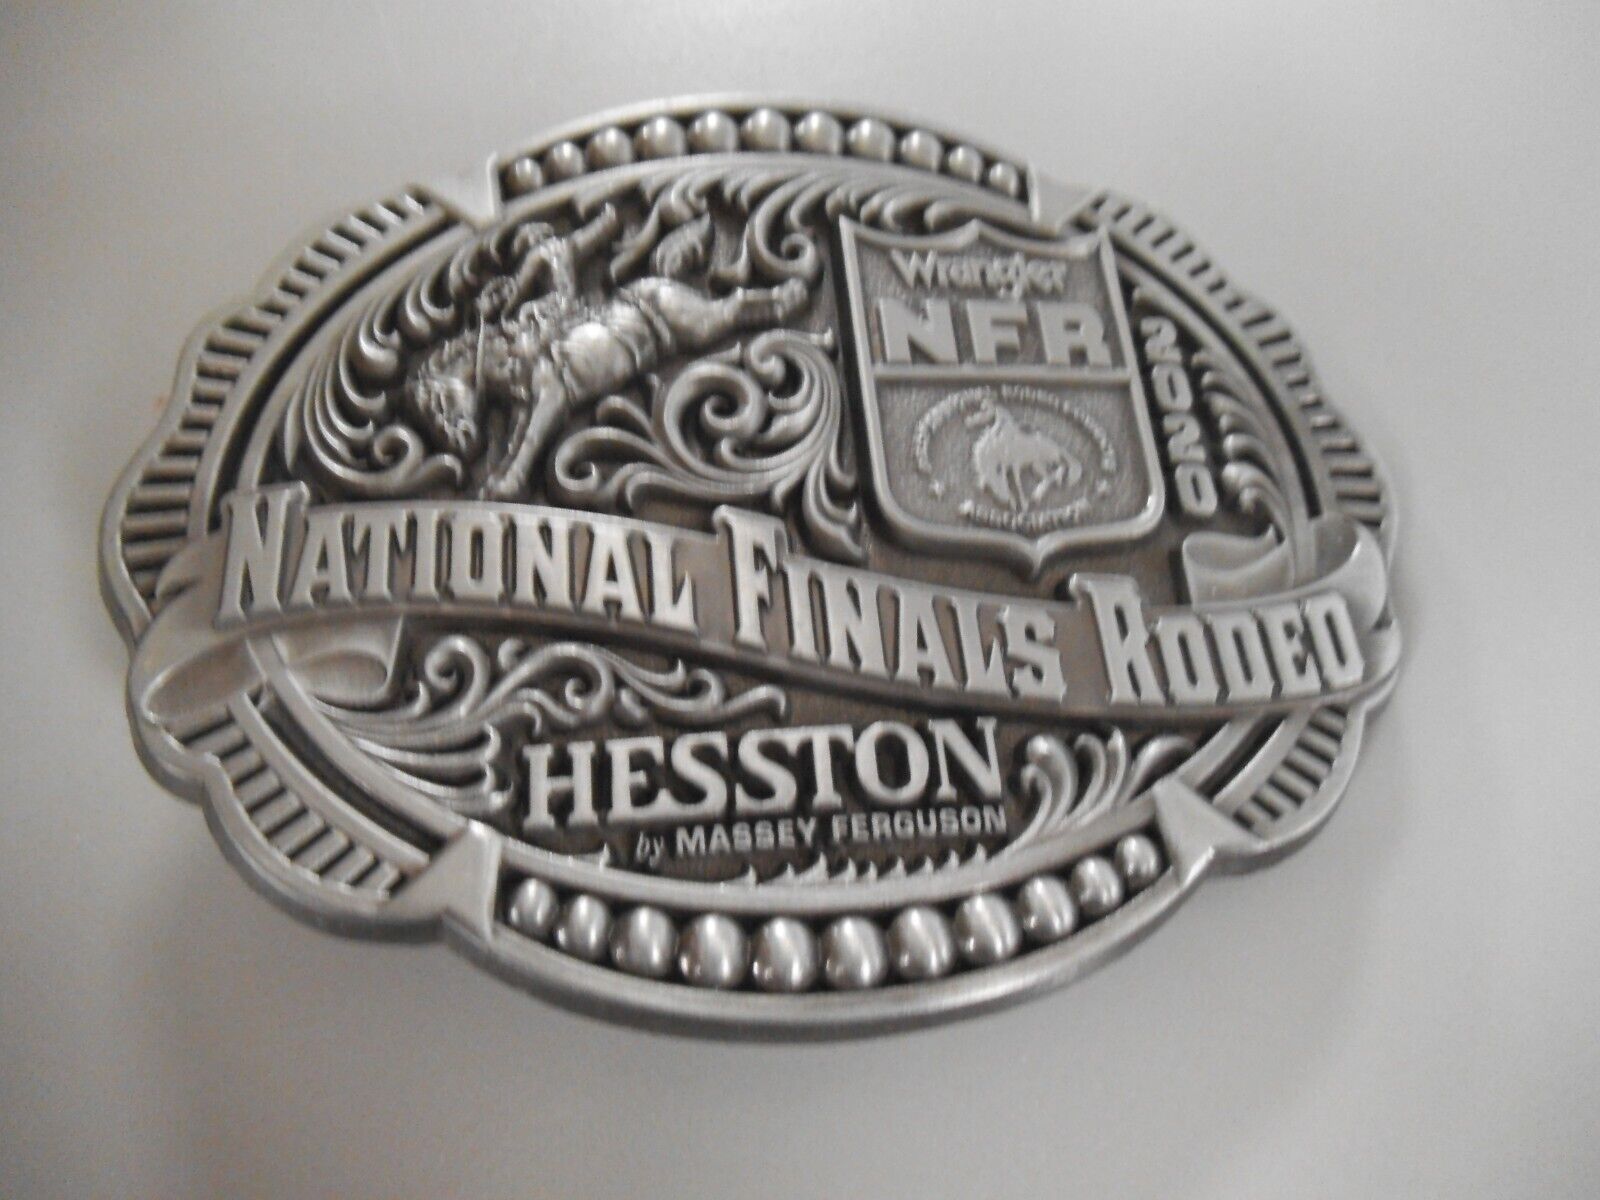 Hesston National Finals Rodeo   2020 belt buckle adult size